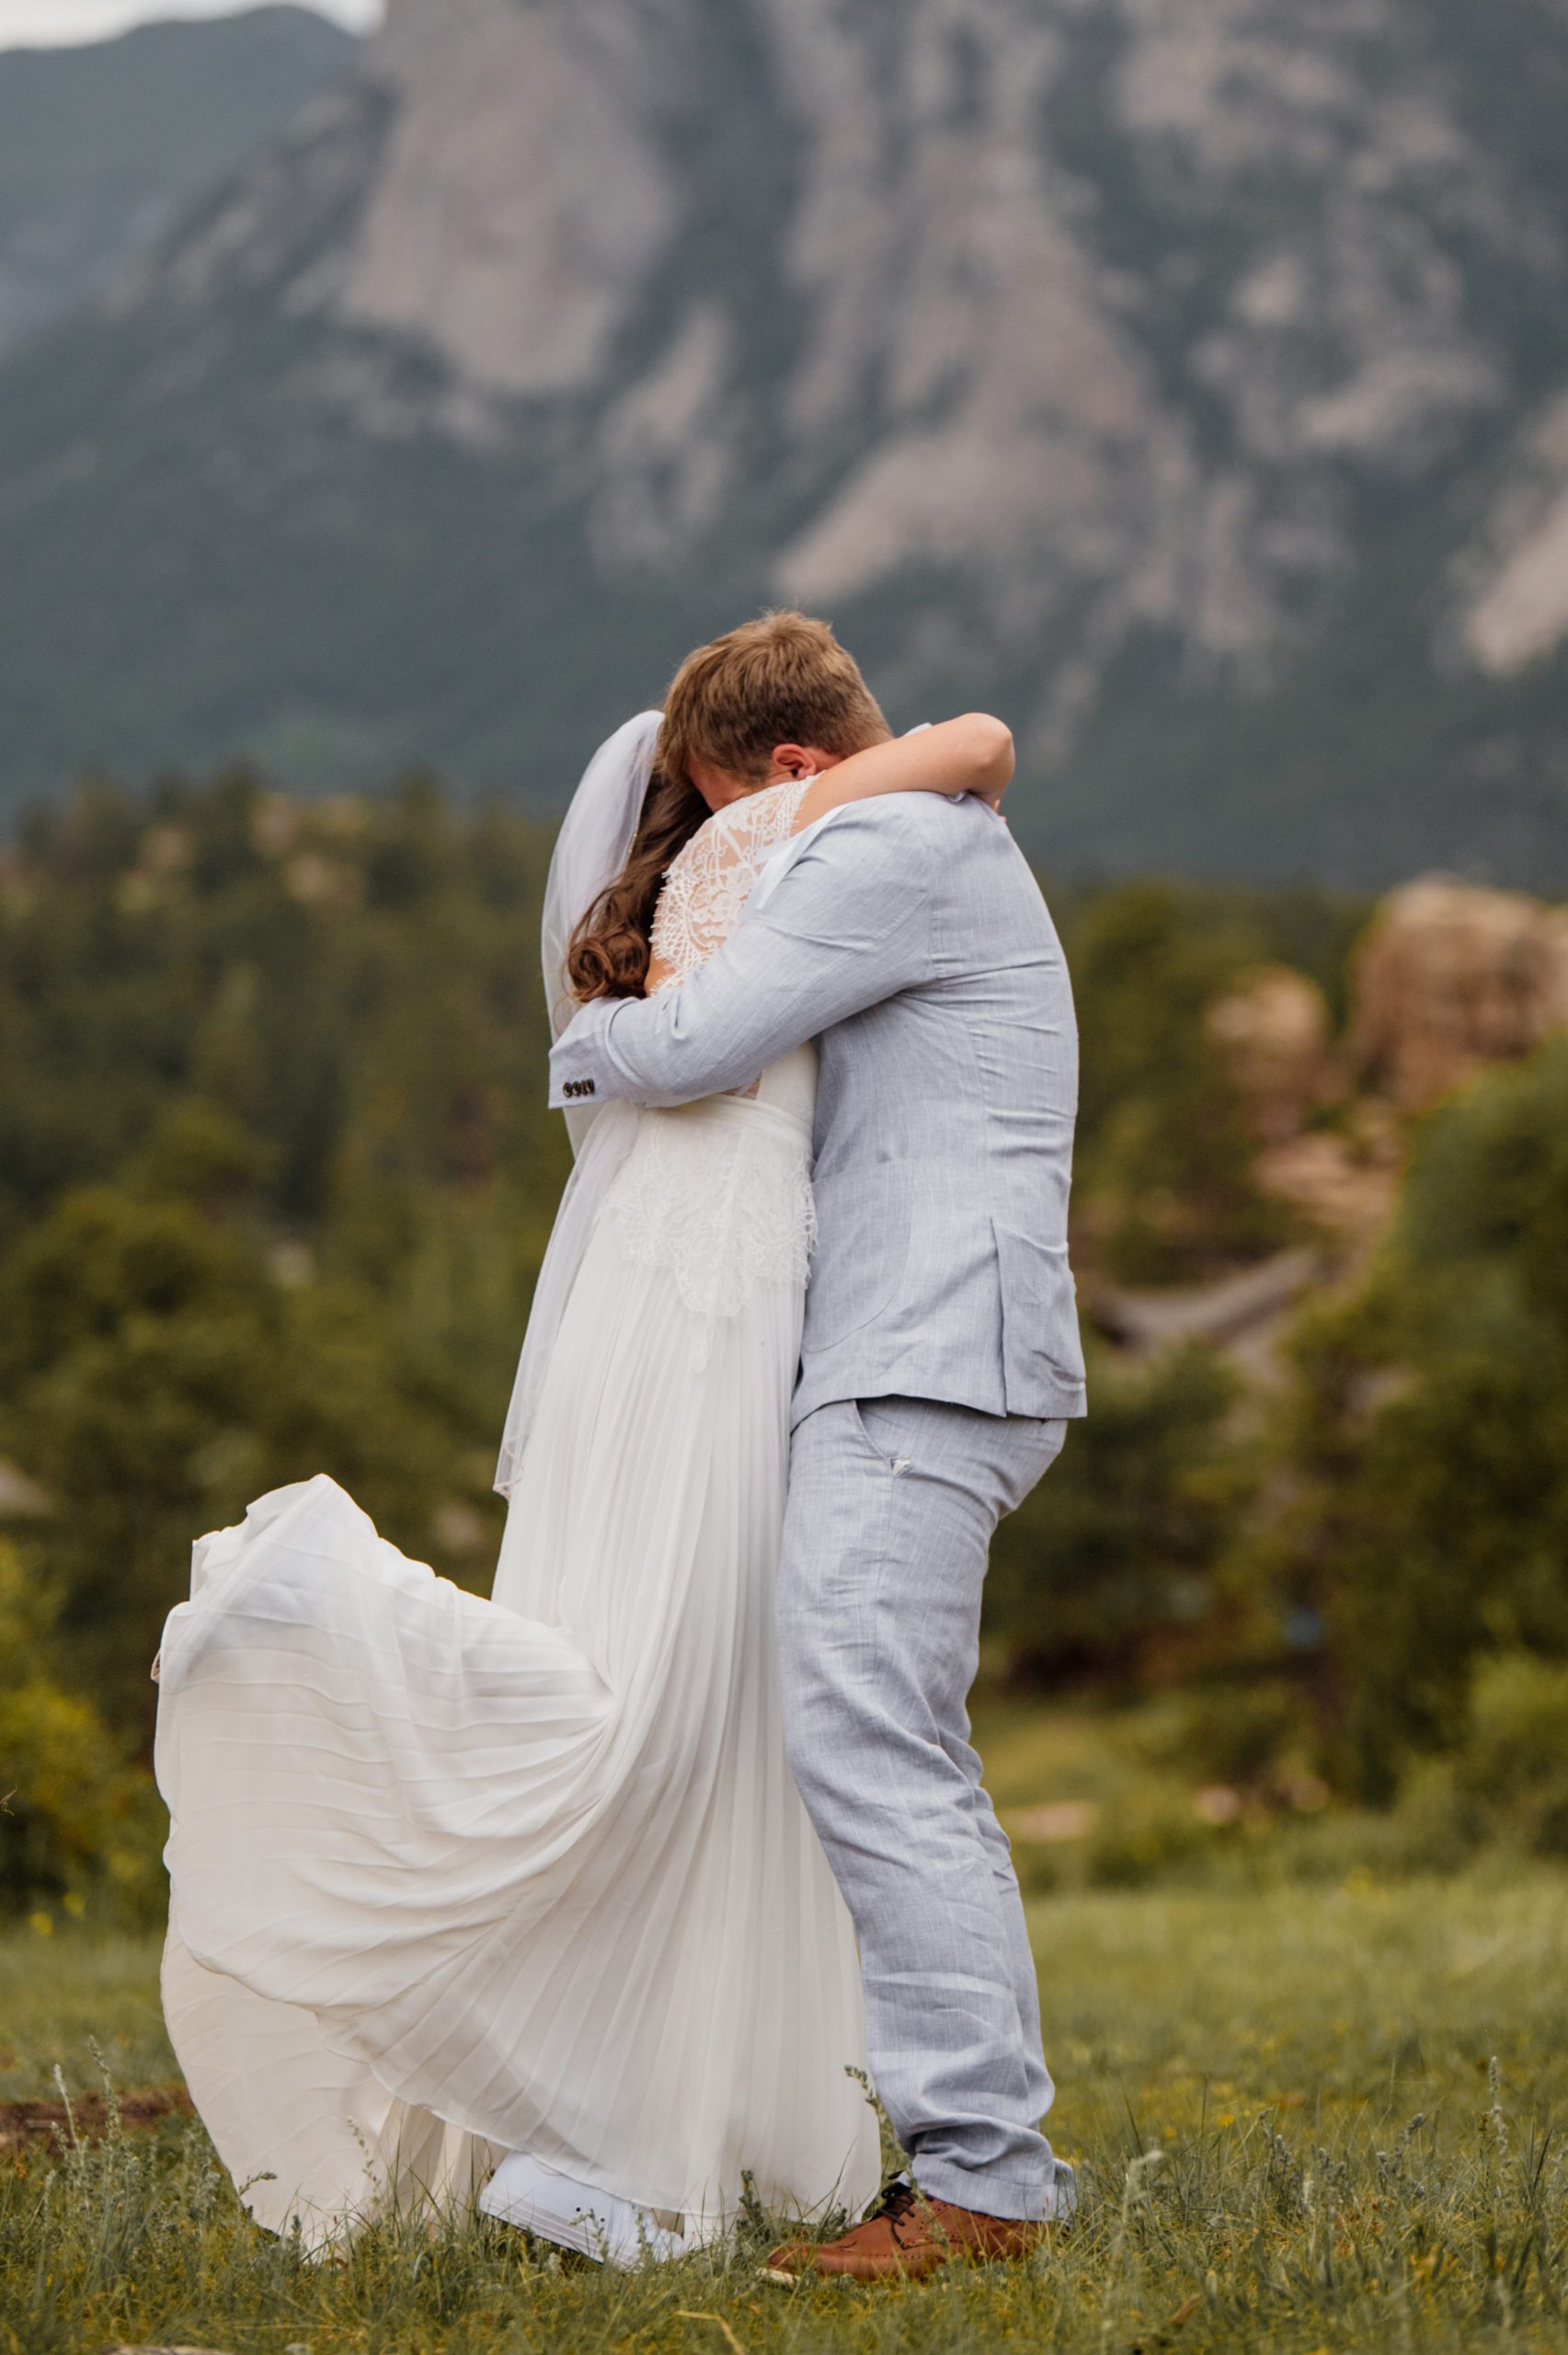 The bride and groom embrace after their elopement ceremony at Knoll Willows in Estes Park.